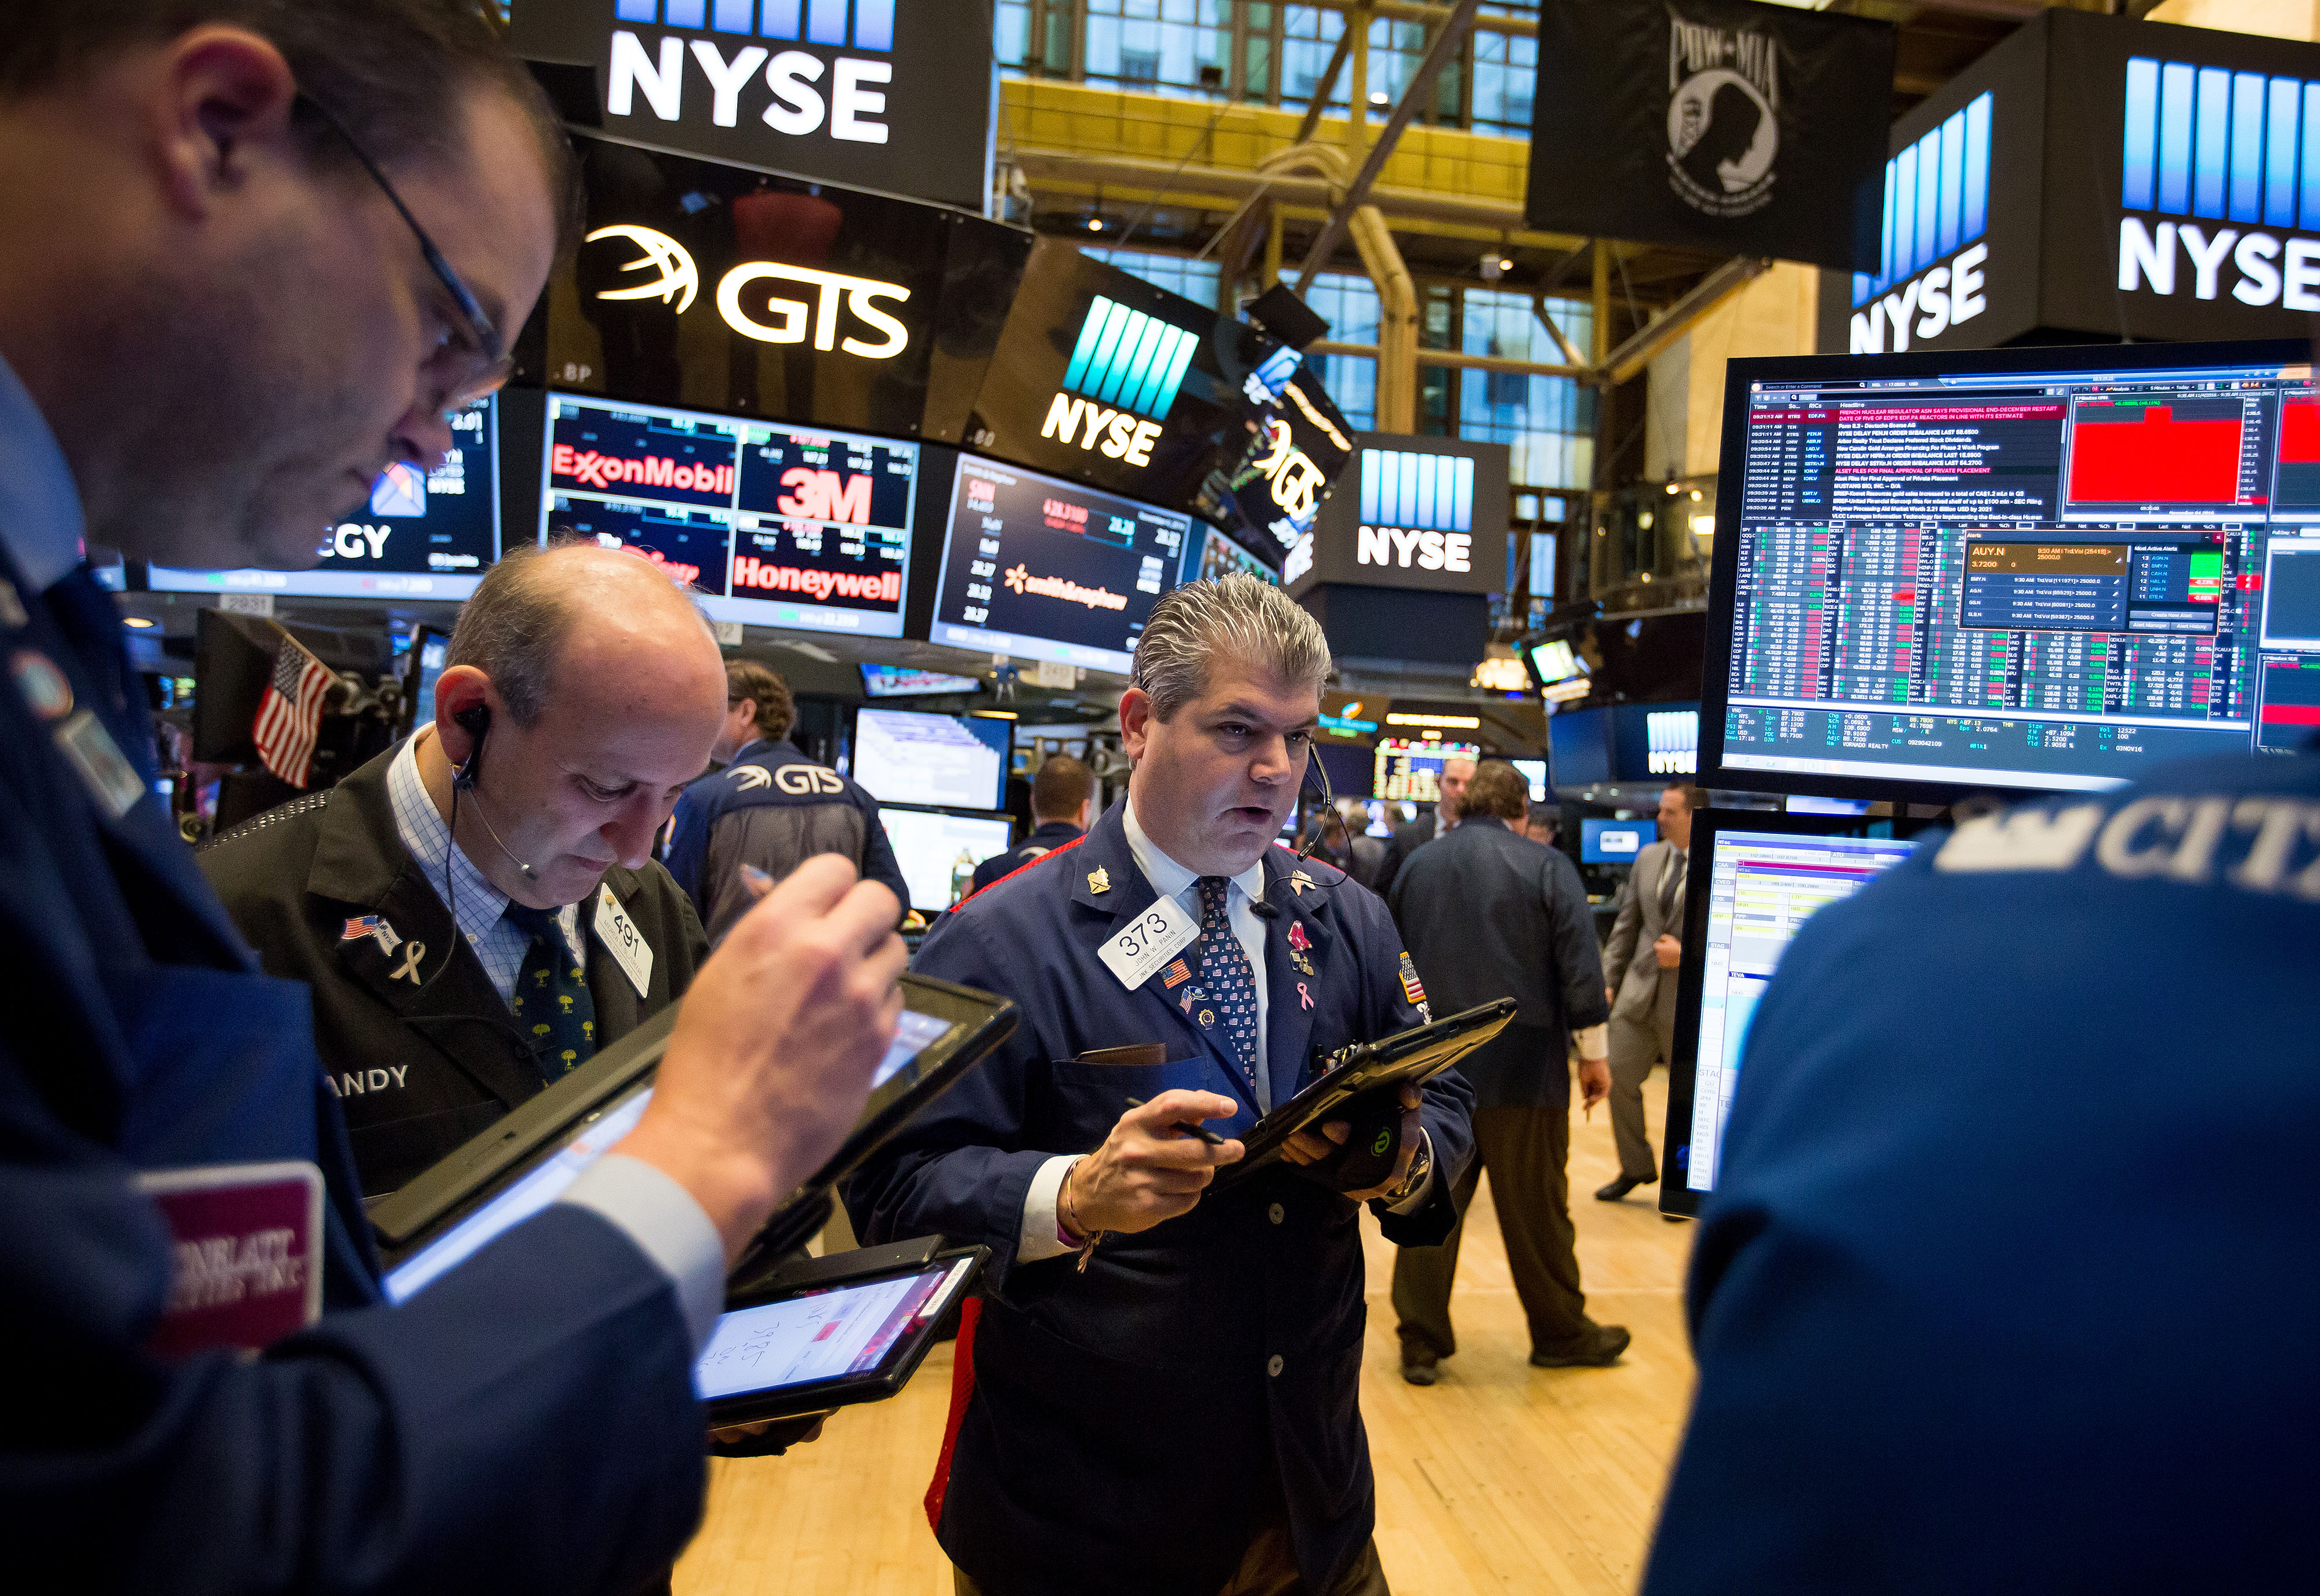 Traders work on the floor of the New York Stock Exchange (NYSE) in New York, U.S., on Friday, Nov. 4, 2016. U.S. stocks fluctuated amid payrolls data that bolstered speculation the economy is strong enough to weather higher interest rates, while investors remained wary before the looming presidential election. Photographer: Michael Nagle/Bloomberg via Getty Images (Bloomberg—Bloomberg via Getty Images)